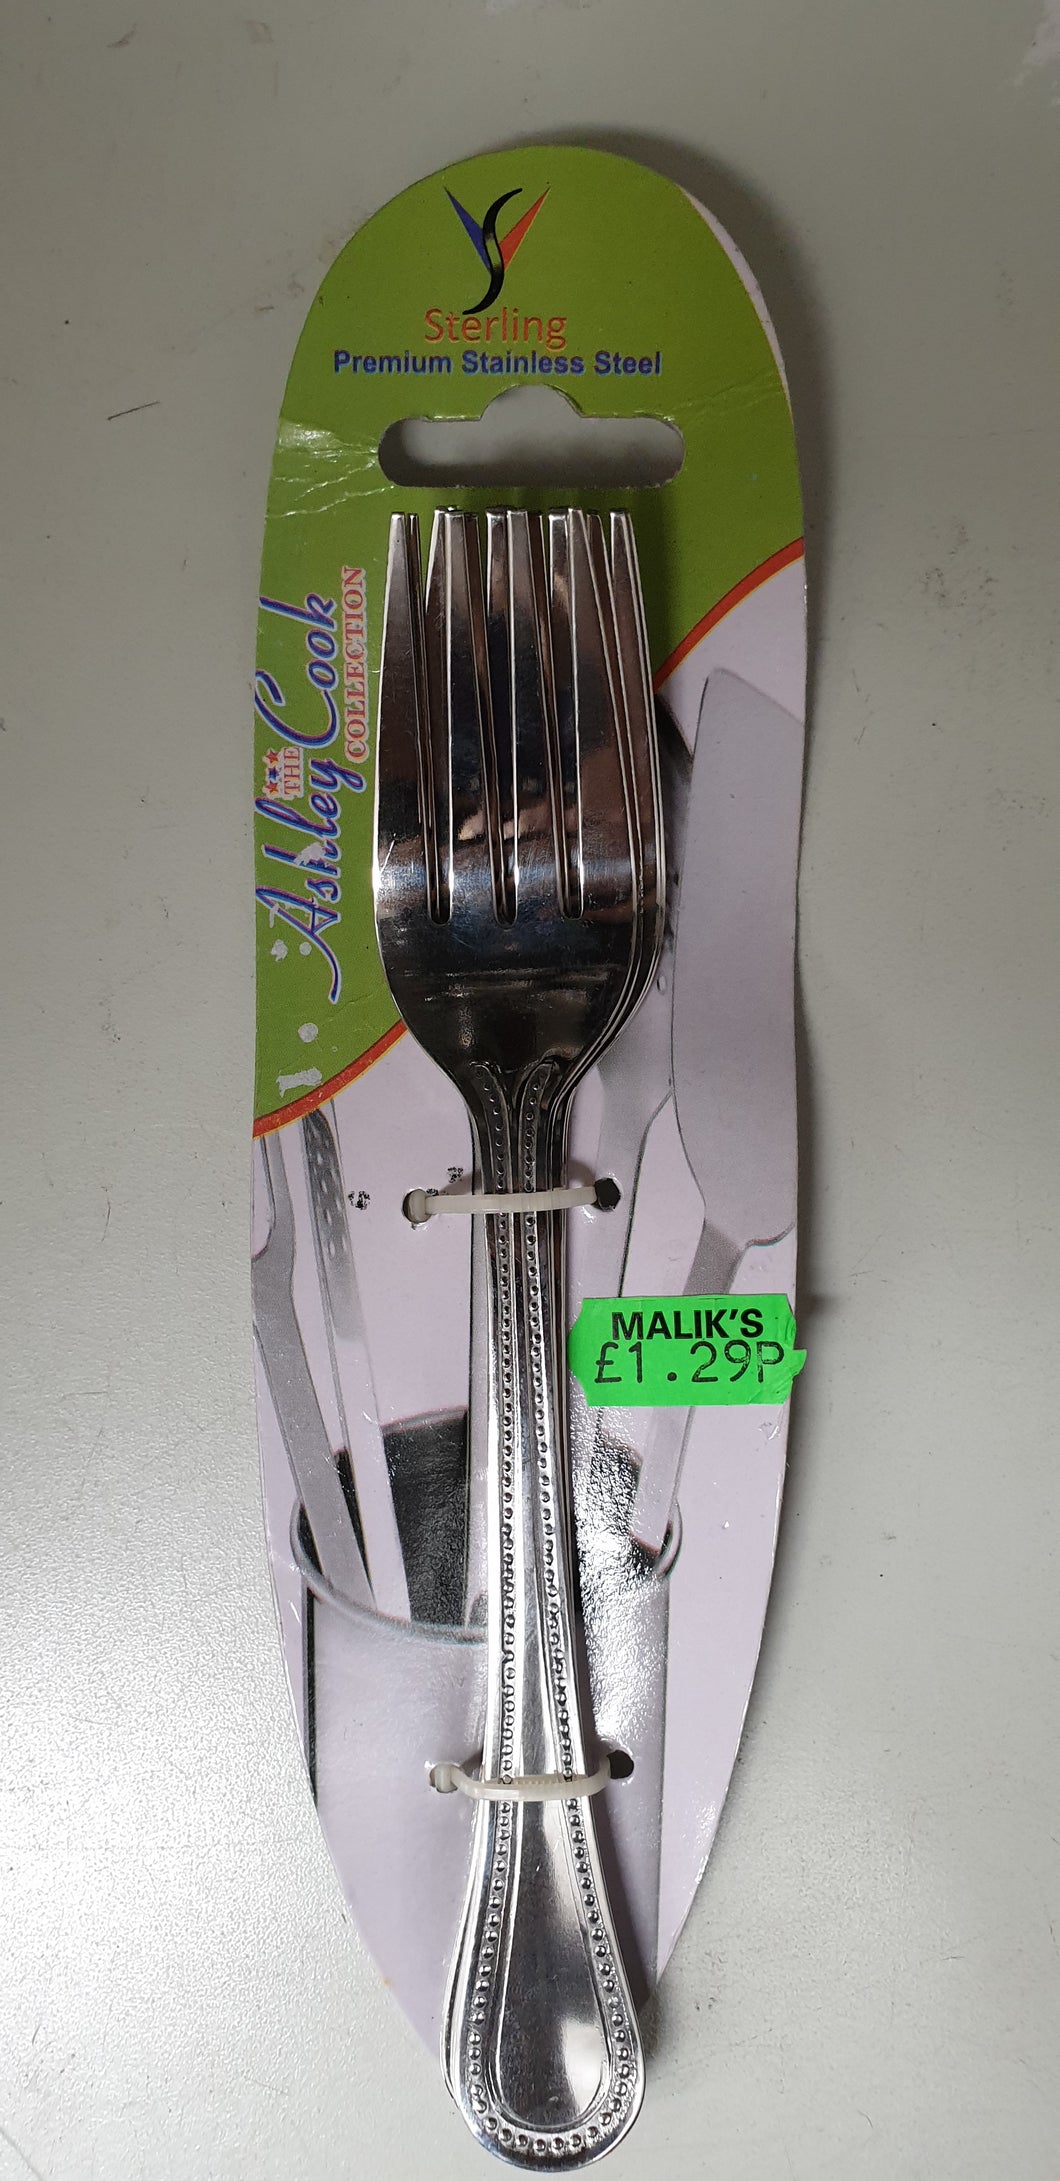 Stainless Steel Royal Forks 4Pc